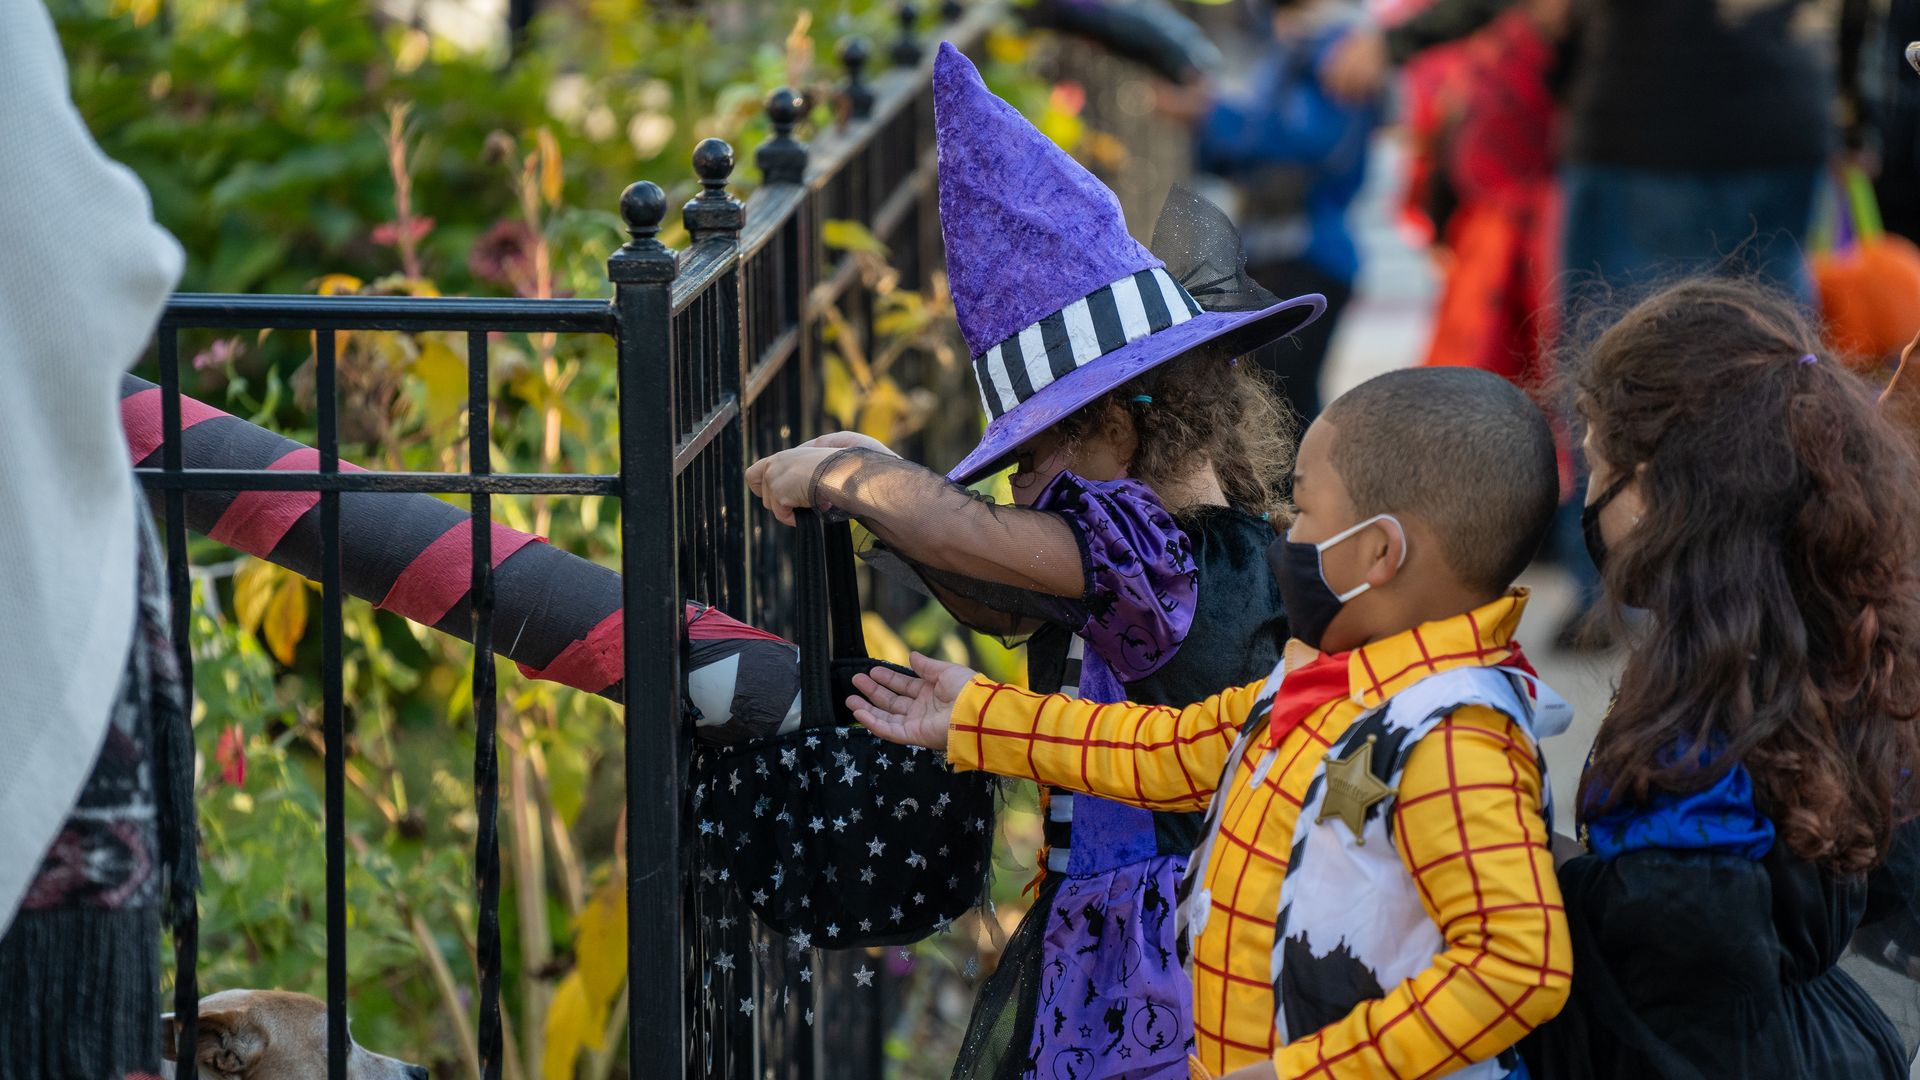 Children receive treats by candy chutes while trick-or-treating for Halloween 